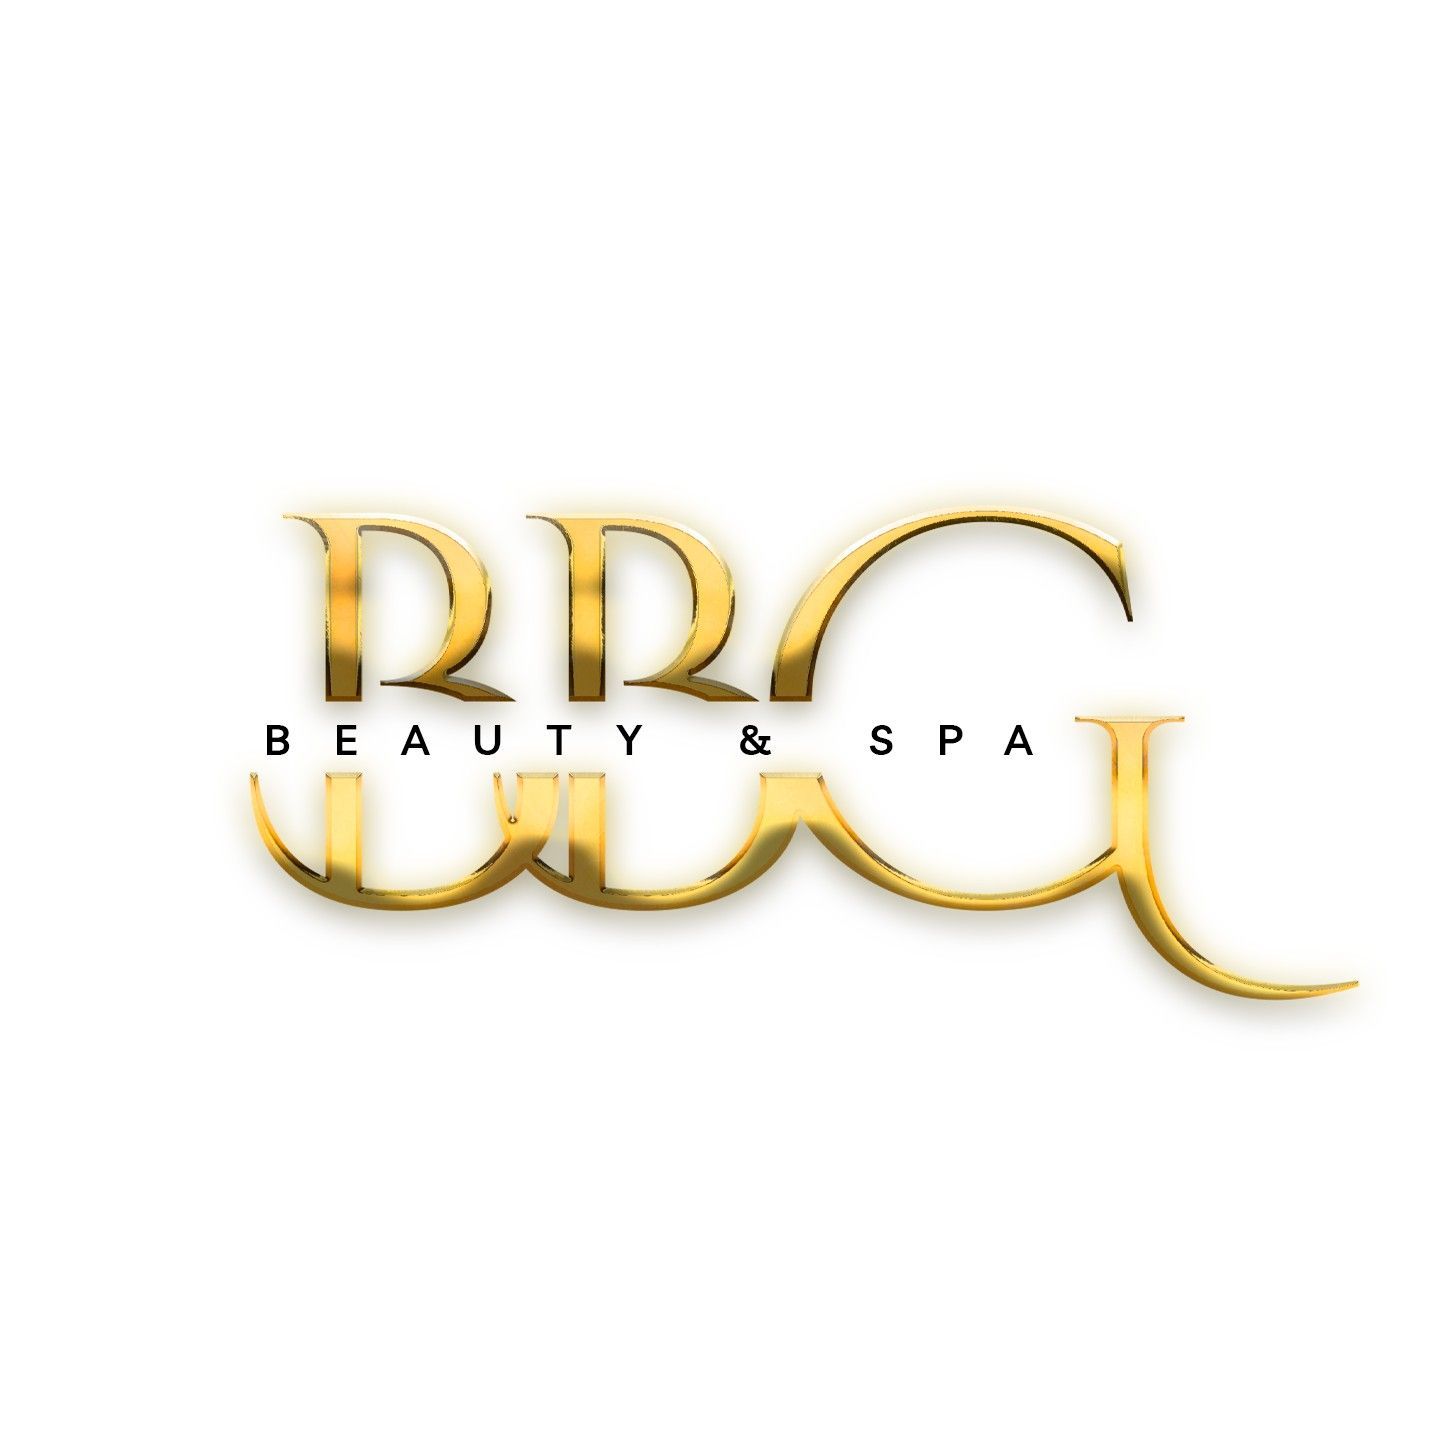 BBG Beauty & spa, 845 N Garland Ave, Suite 115 A, Orlando, 32801